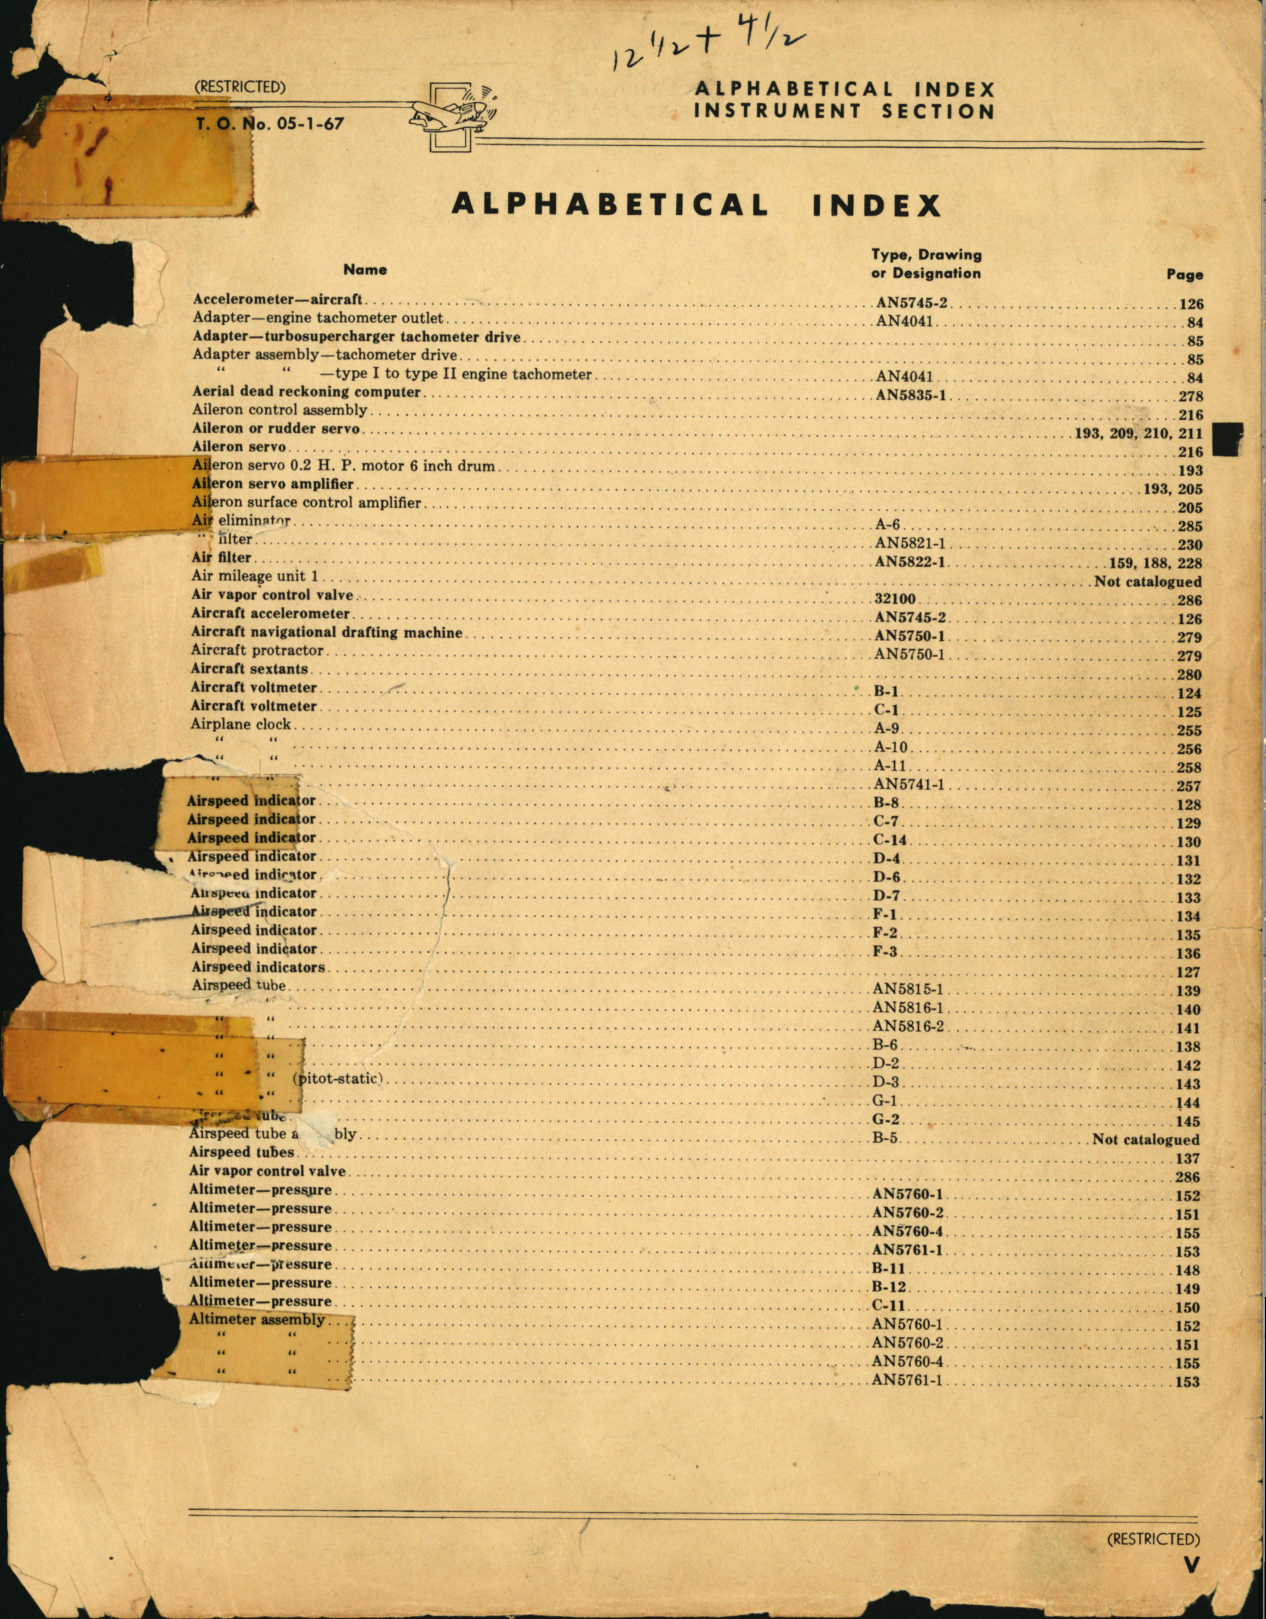 Sample page 1 from AirCorps Library document: Index of Army-Navy Aeronautical Equipment - Instruments